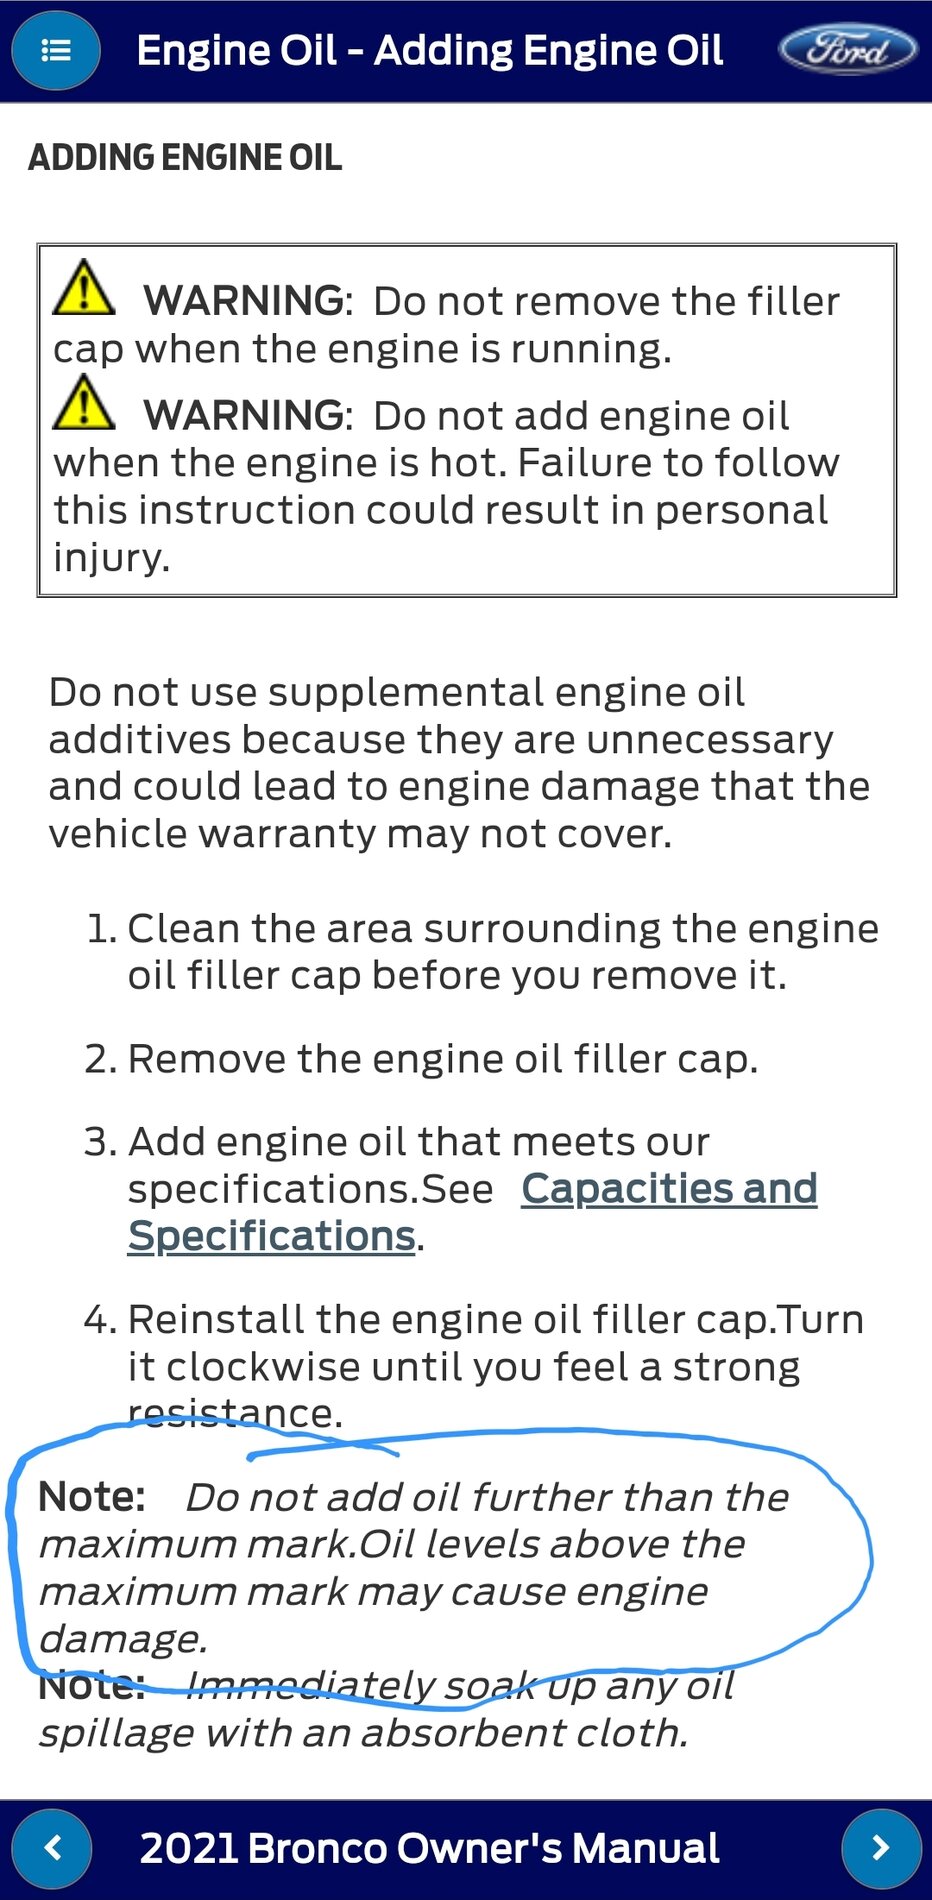 Ford Bronco Bronco Team Engineering Confirms 7.0 Quarts for 2.7L Engine Oil Change is Correct Screenshot_20211123-104604_FordPass